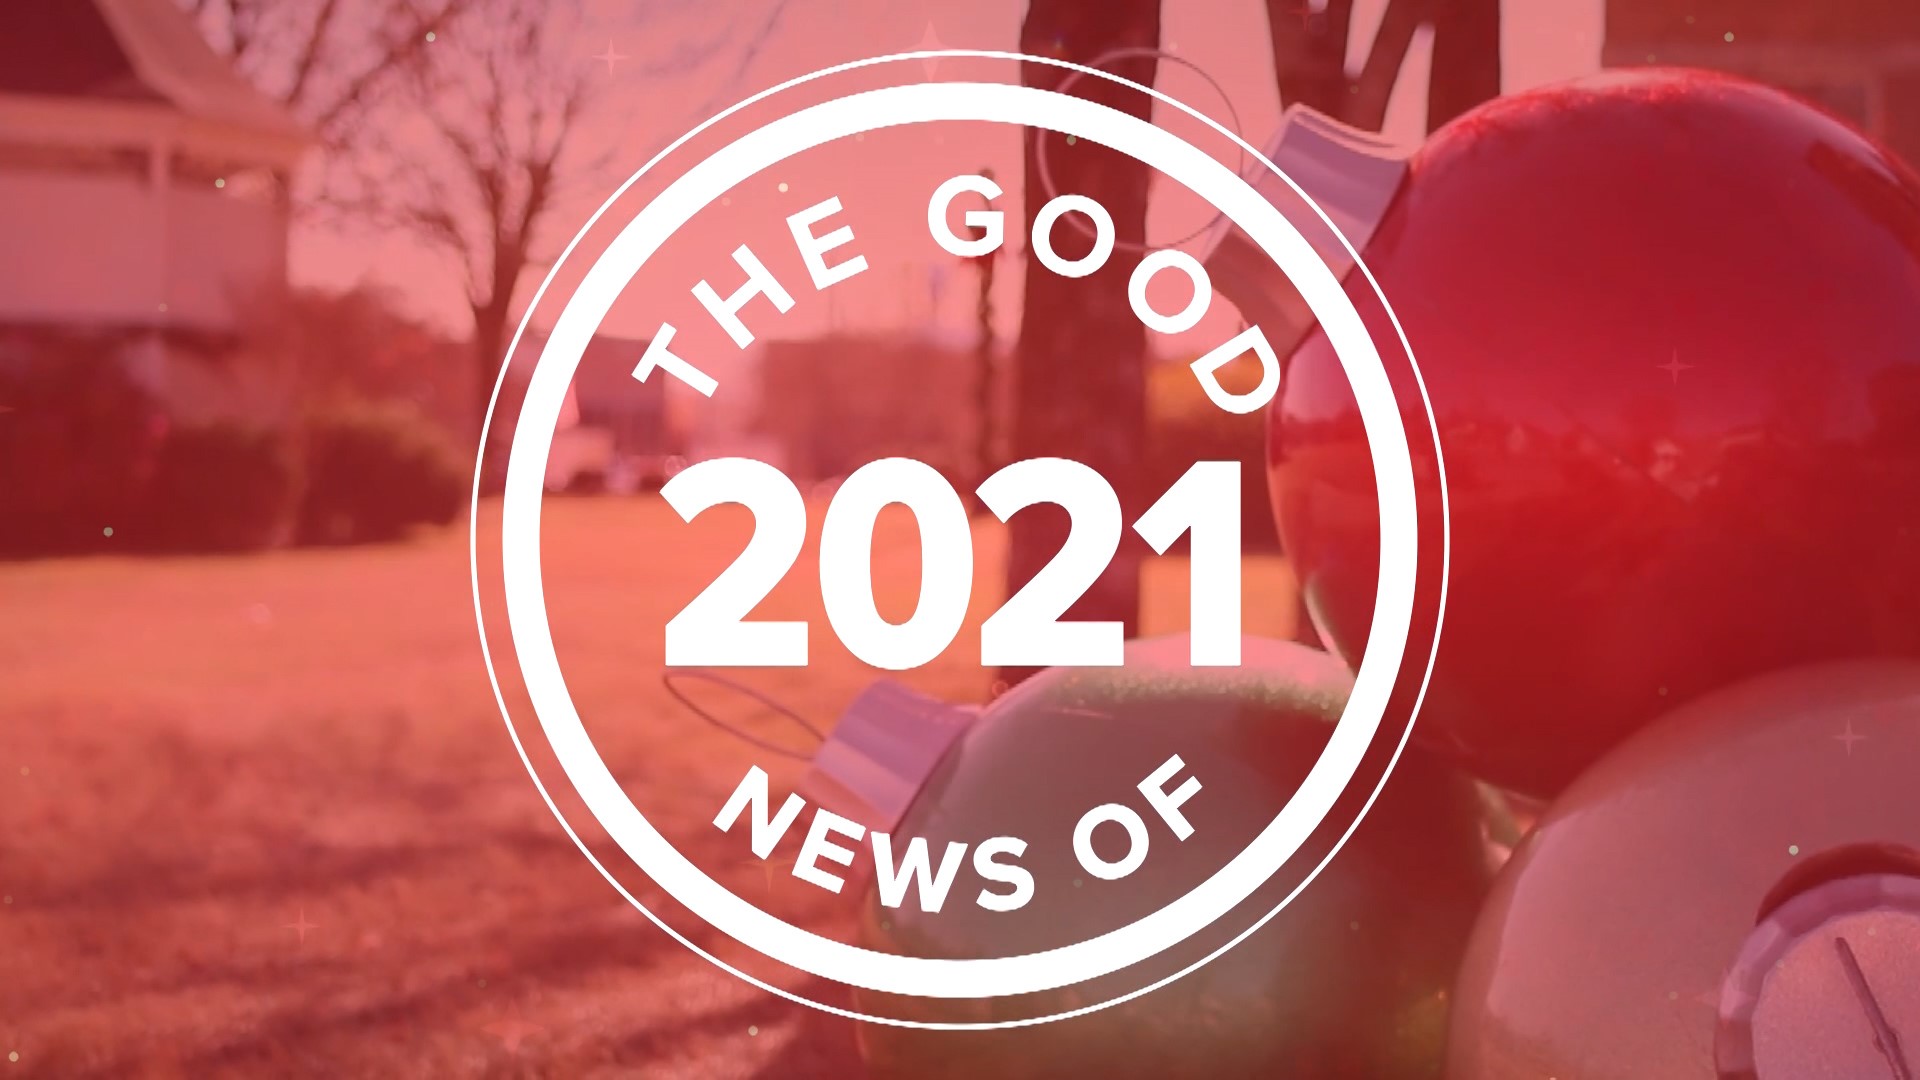 While 2021 may have been another year in the pandemic, here are some of the good news stories we reported on this year.